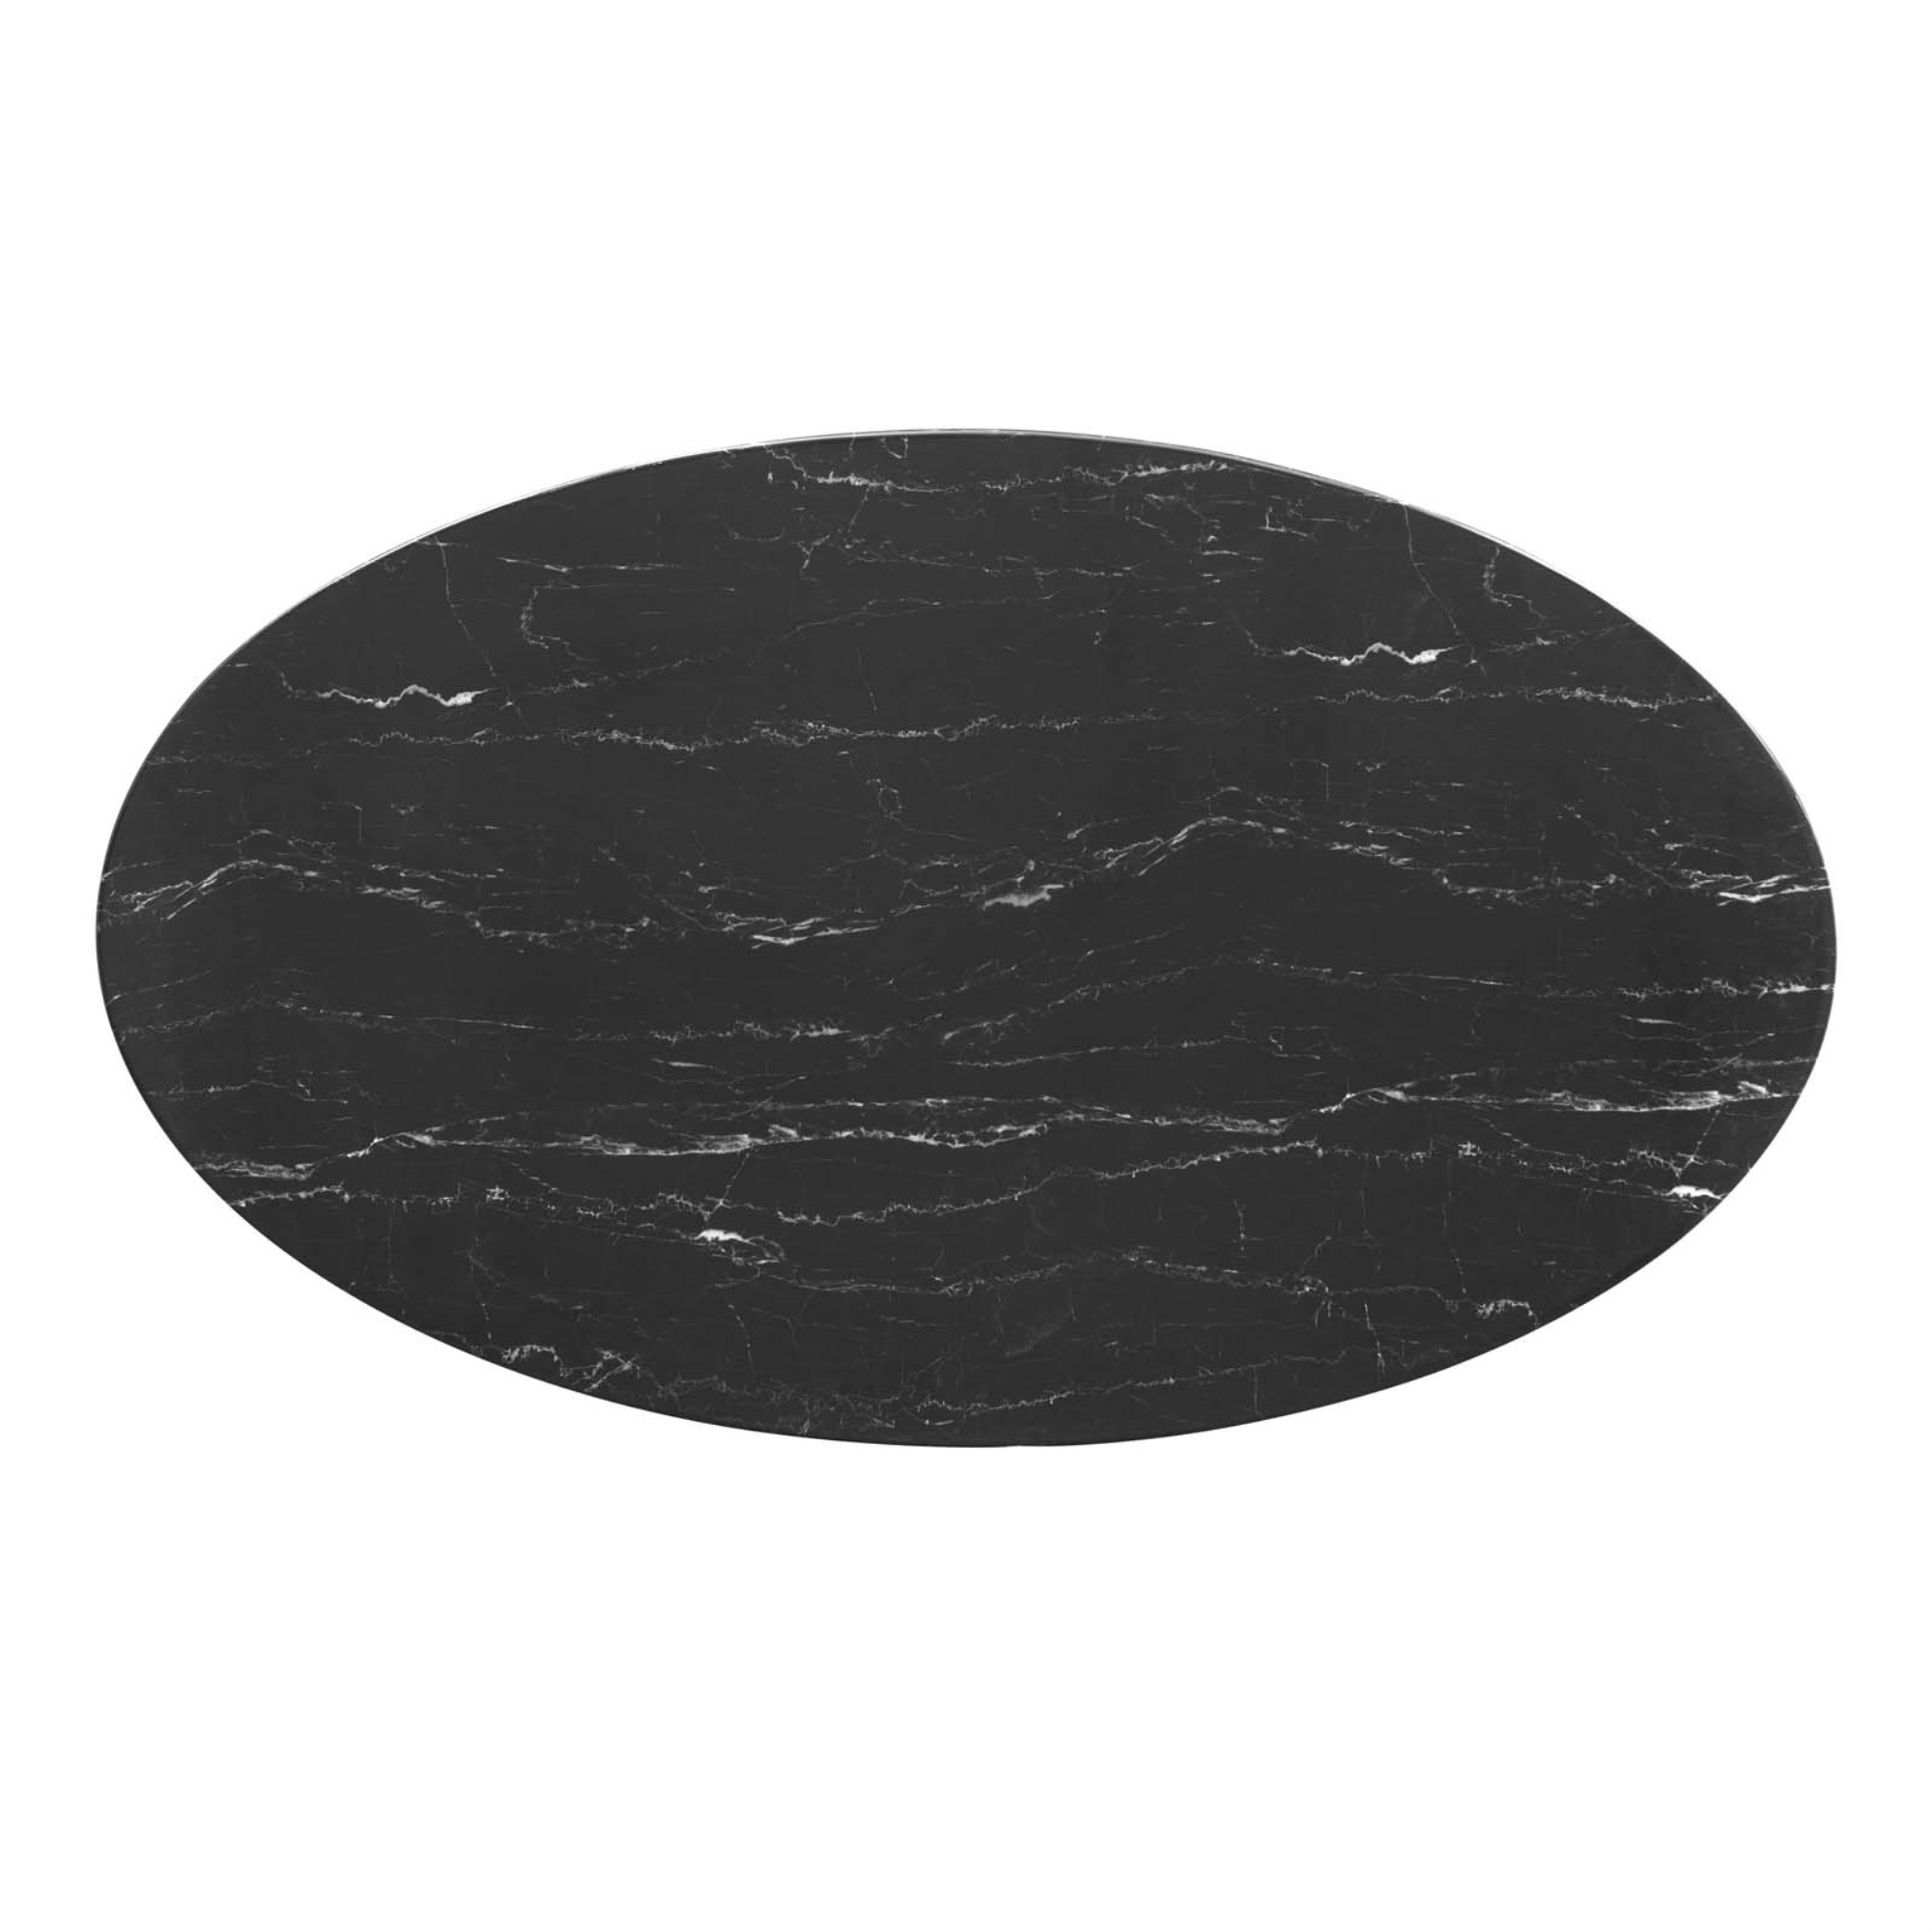 Modway Lippa 54" Artificial Marble Oval Dining Table Black Black